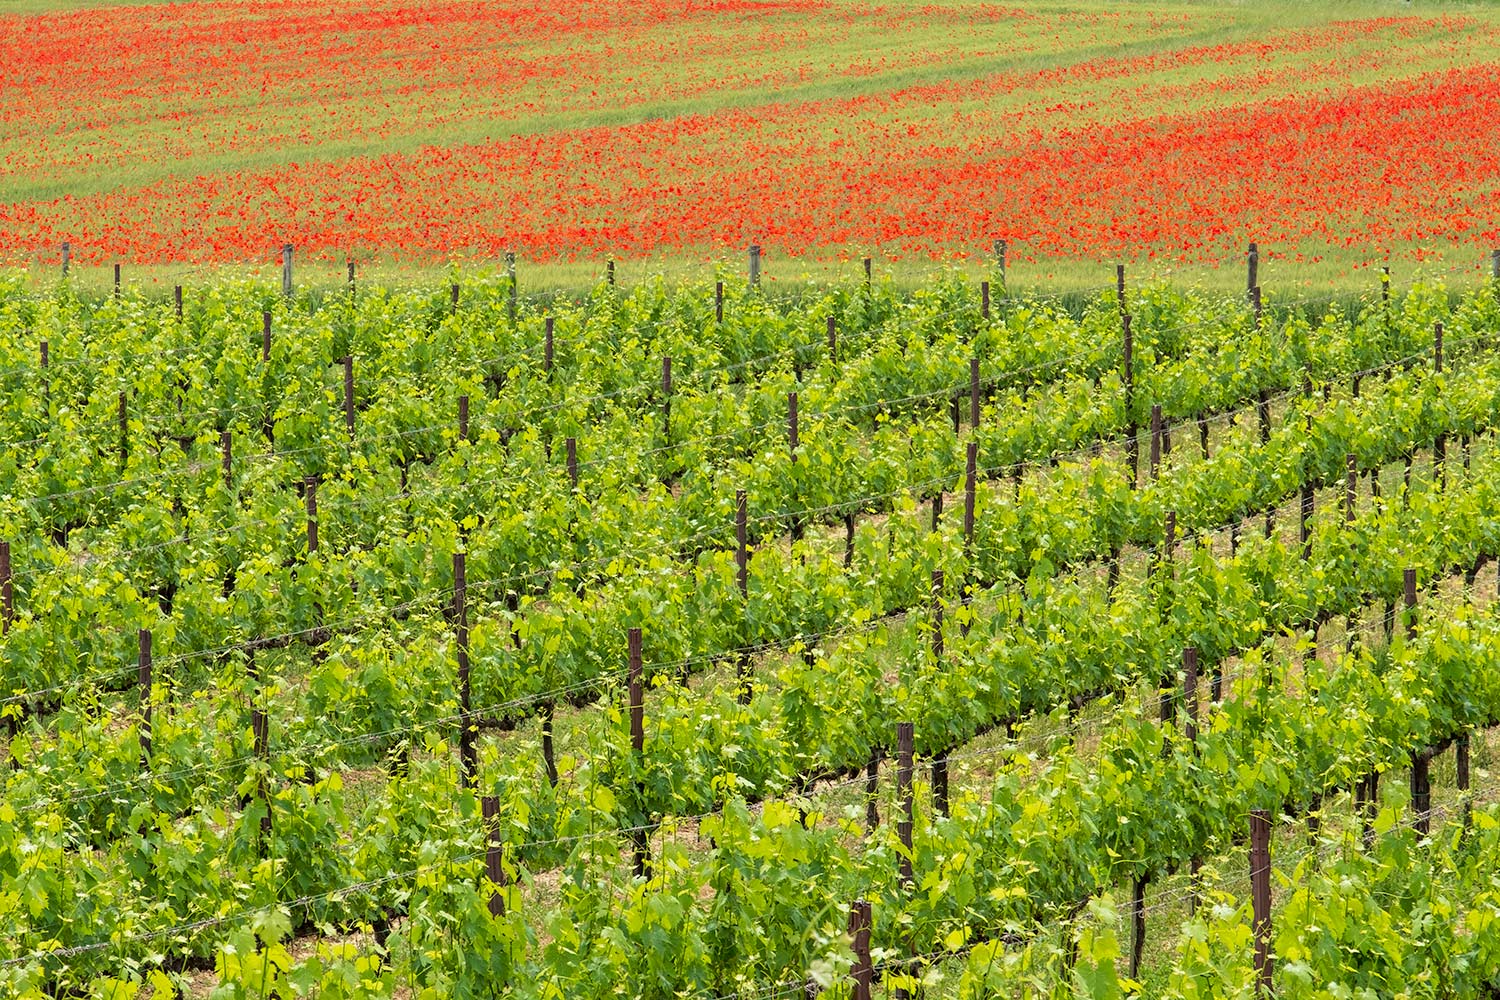 A field of vines near a field of poppies provide an interesting view as the greens turn to red in Siena, Italy.